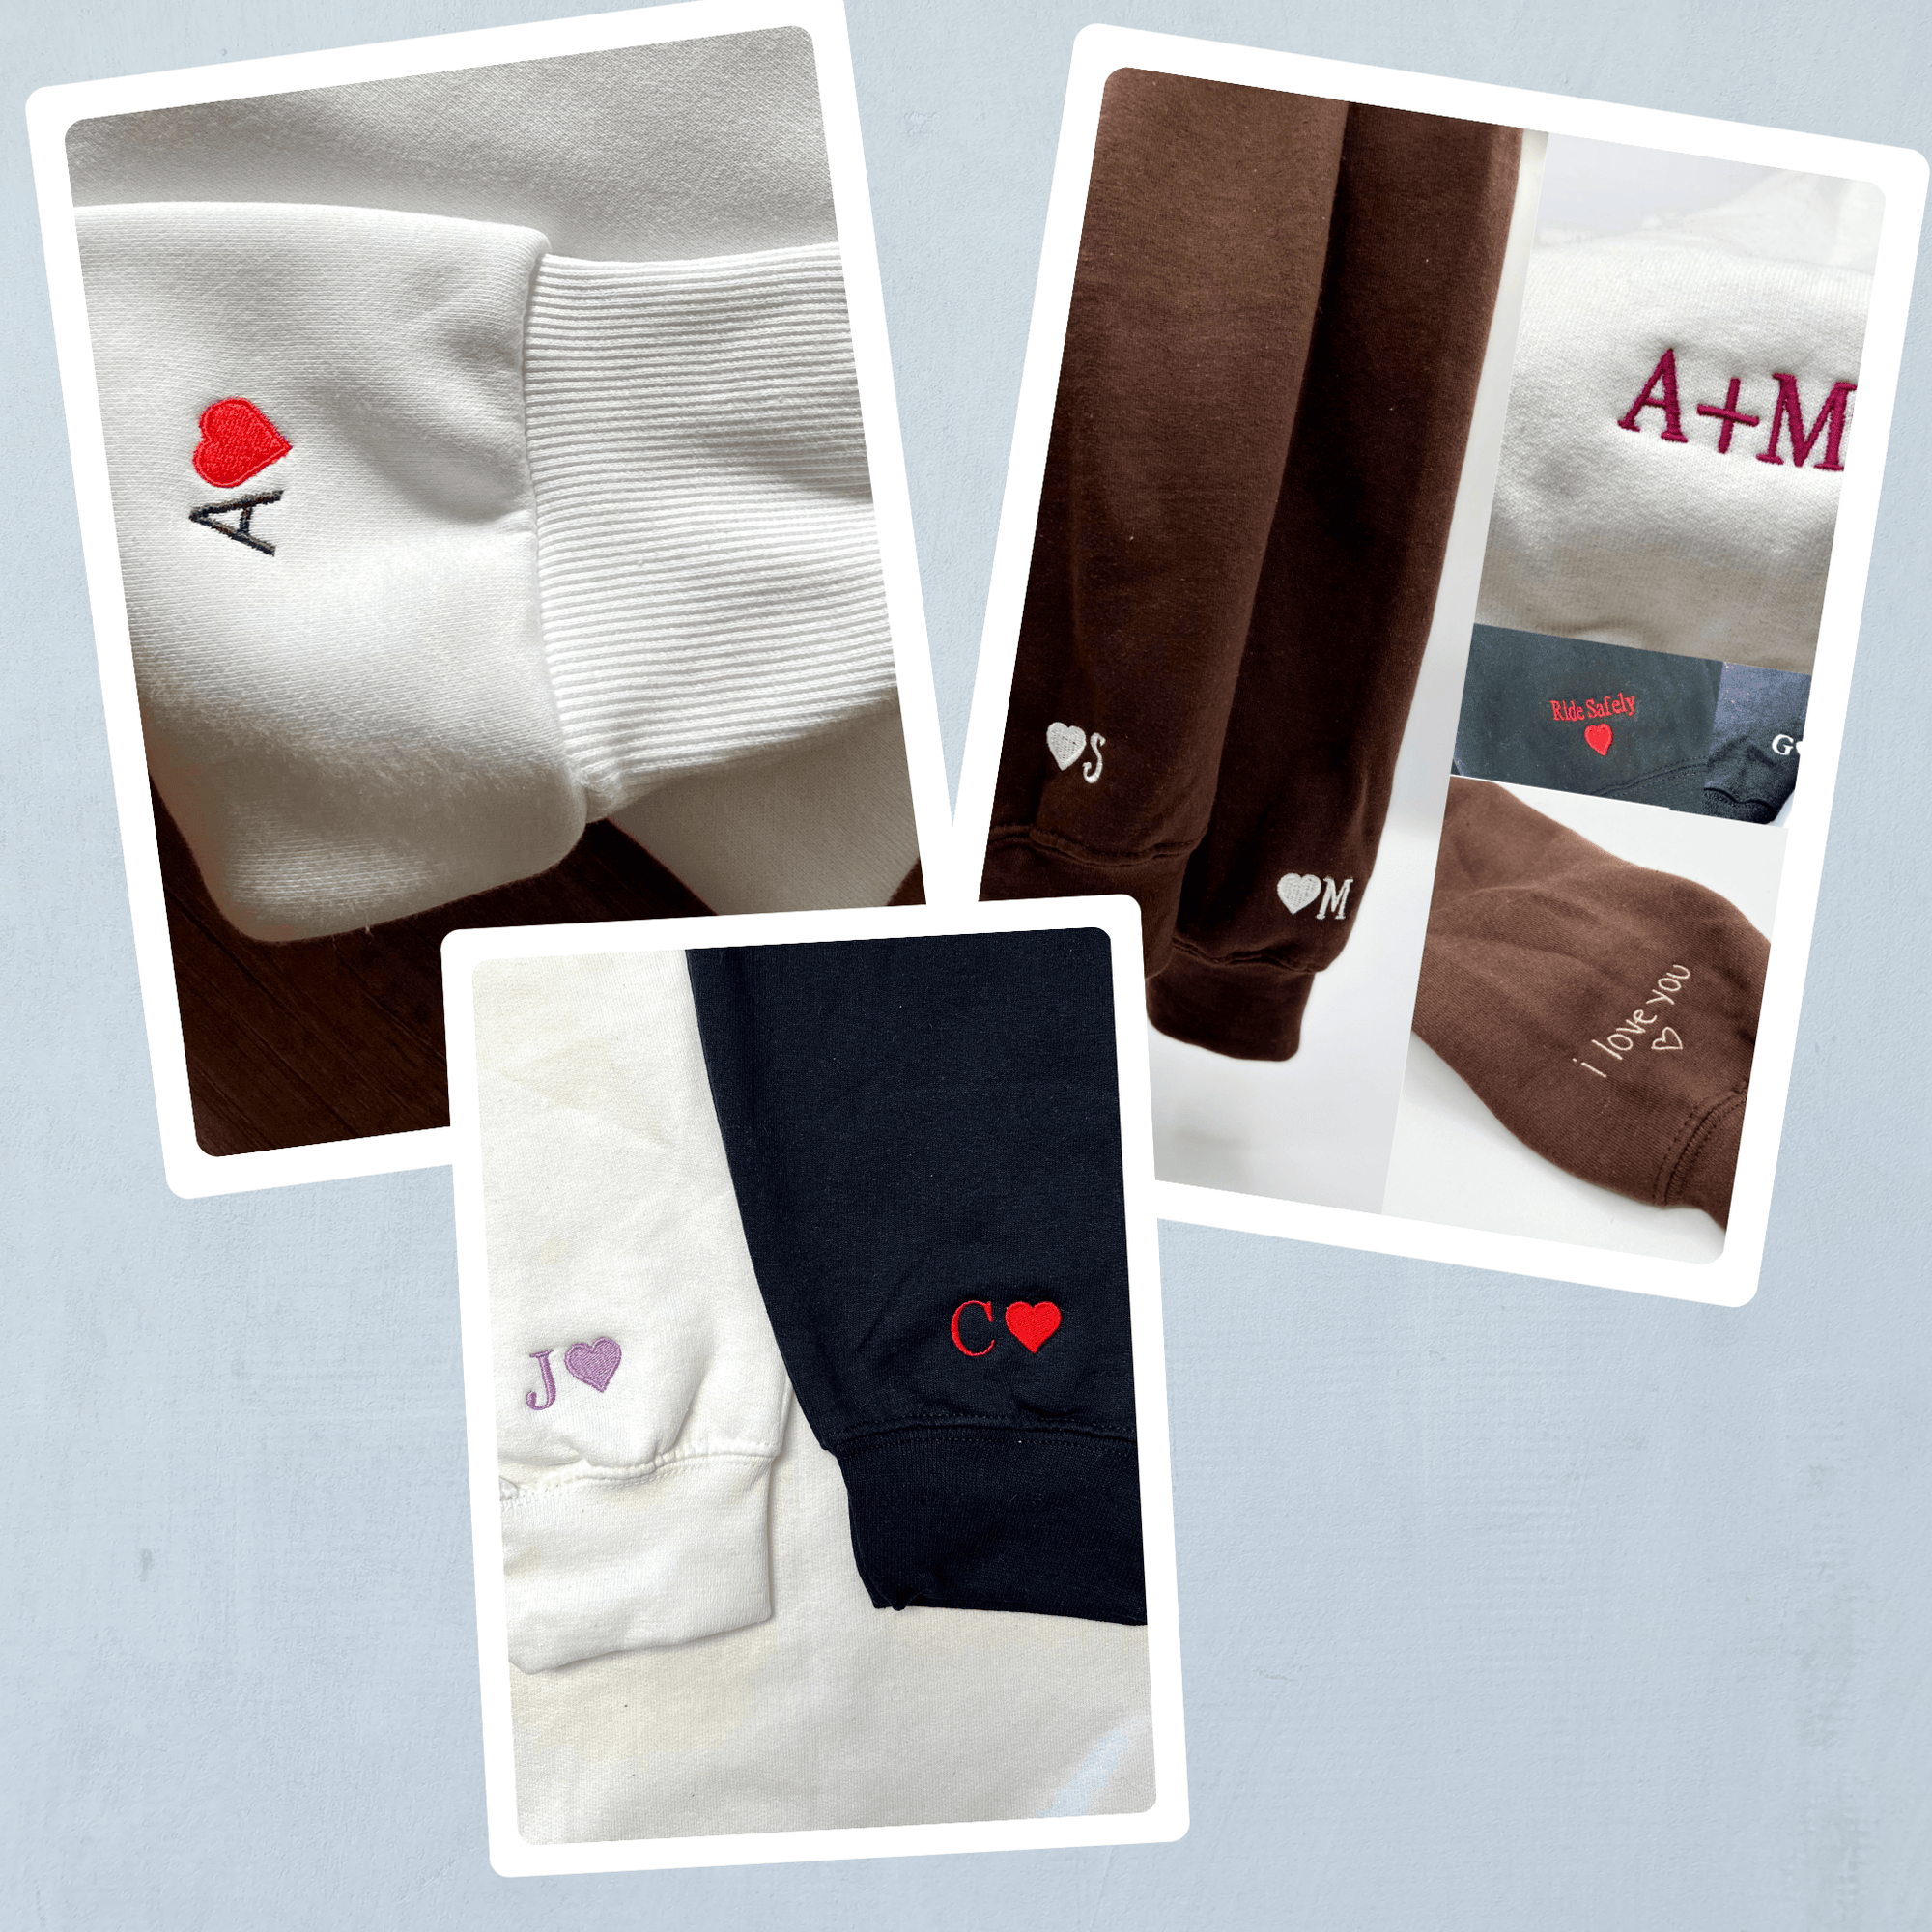 Custom Embroidered Hoodies For Couples, Custom Matching Couple Hoodie, Mouses Heart Cartoon Couples Embroidered Hoodie